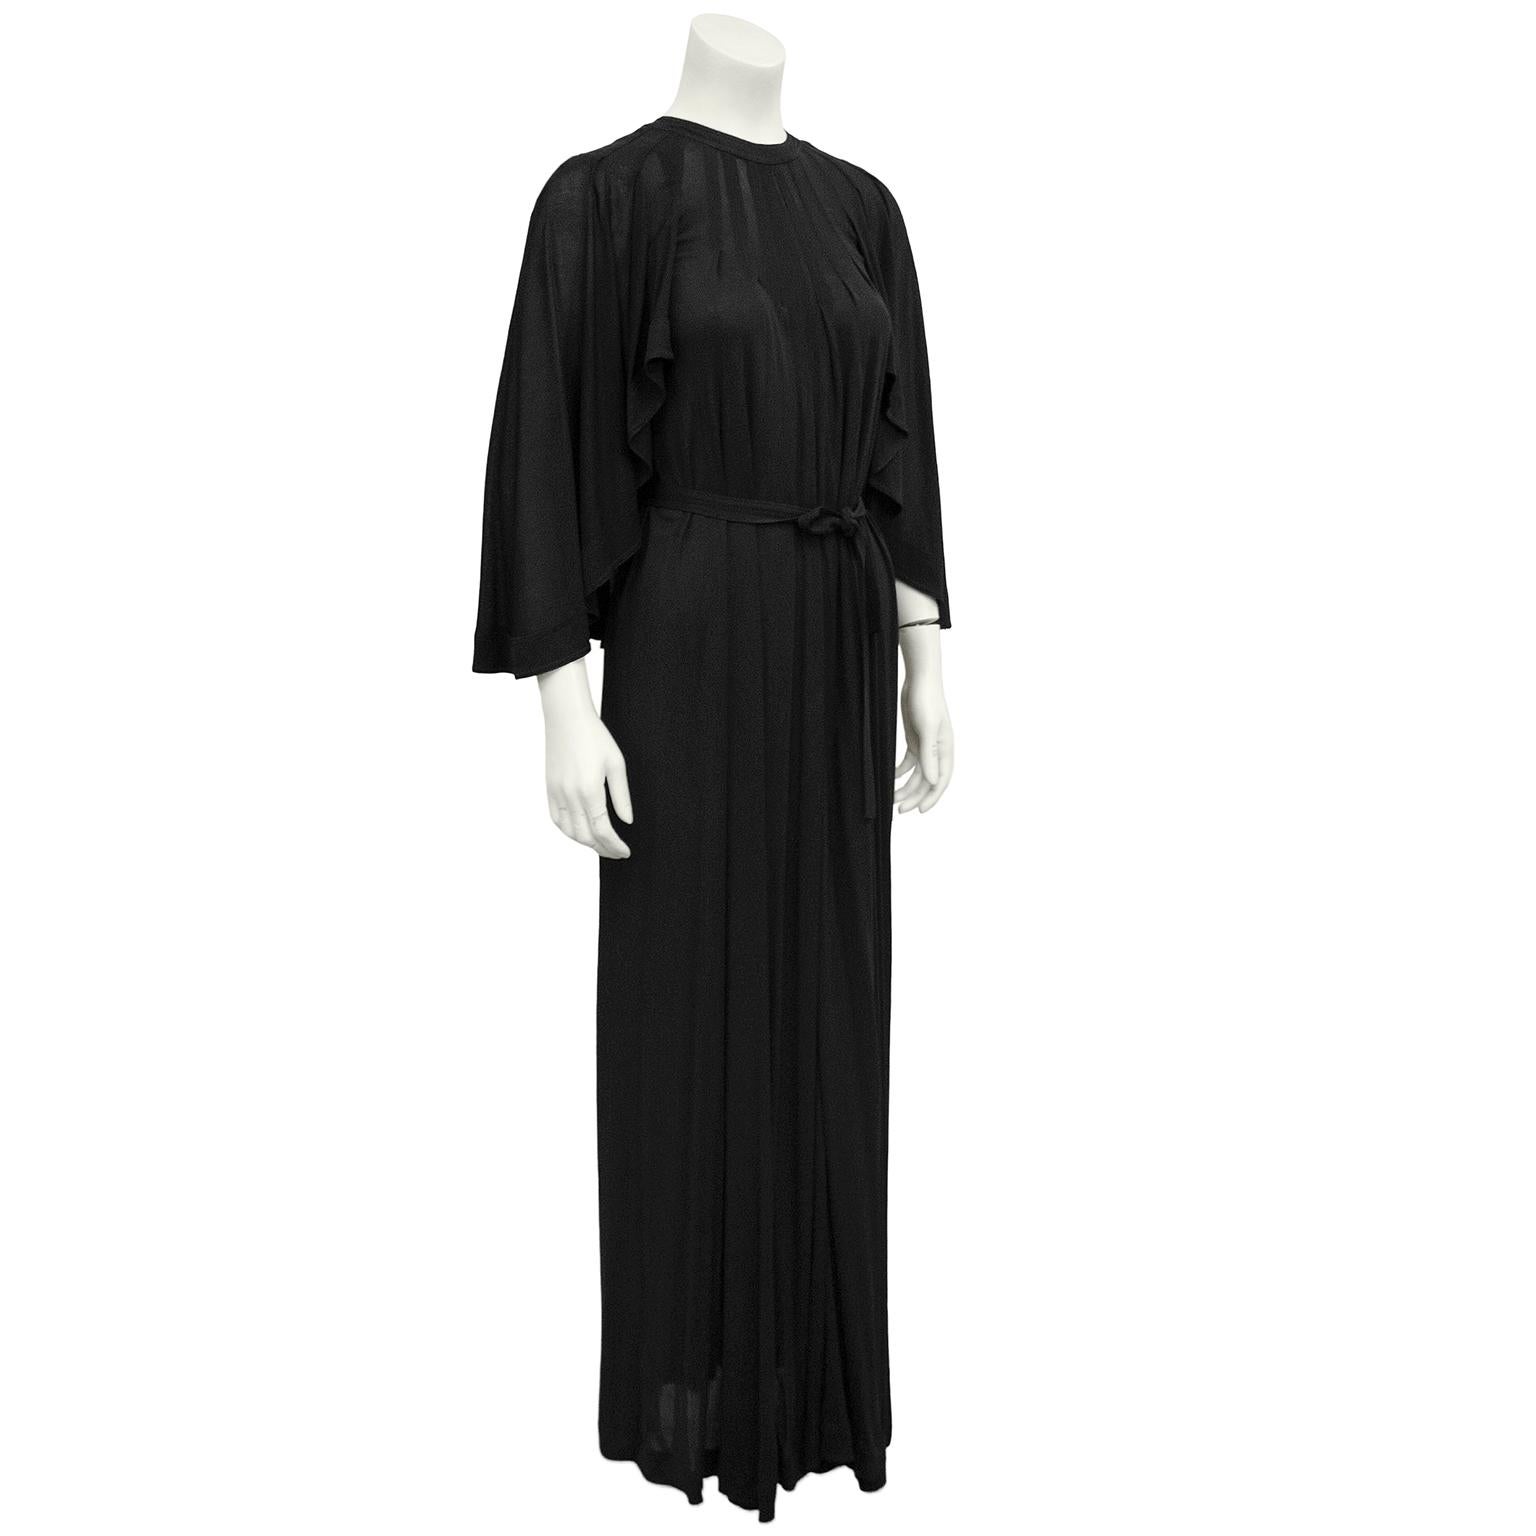 Early 1980s Jean Muir black rayon jersey gown. Features a demi cape back with long flowing sleeves. Smocking detail at yoke & tie at waist. Pockets. Very bohemian chic. Excellent vintage condition. Fits like a size 6/8 US